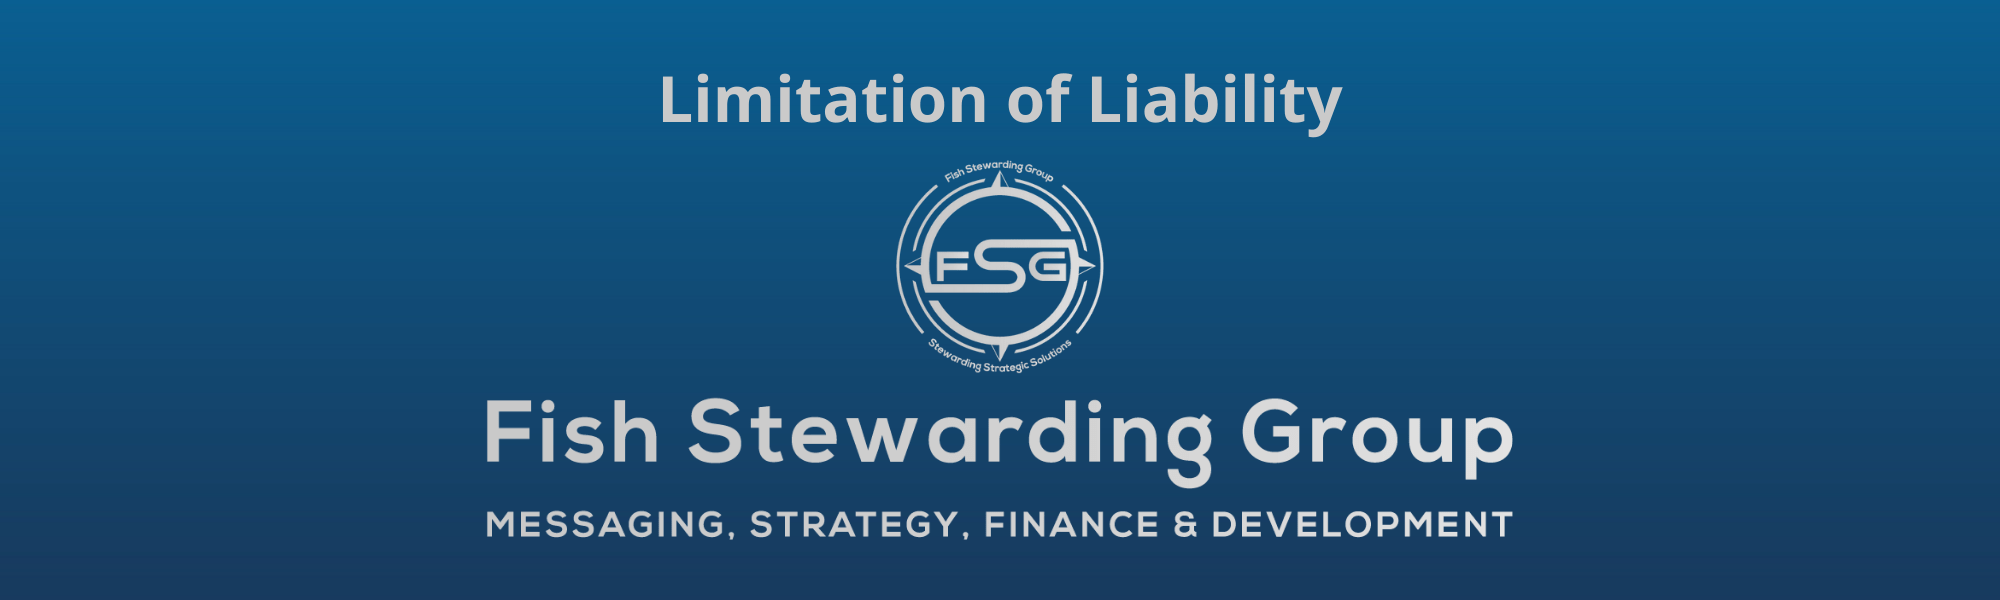 A thin rectangular Footer graphic for the Limitation of Liability page. The background is a blue gradient color that goes from a dark blue on the bottom to a lighter blue on top. The text in gray on top reads Limitation of Liability. The text in gray on the bottom center reads: Fish Stewarding Group and beneath that, the text reads Messaging, Strategy, Finance and Development. In the center above the text is the FSG logo in gray. The logo has the letters FSG in the middle with a circle with four pointed arrows facing north, south, east and west with the S connected to that circle. Four rounded lines make the next circle of the circle and the last layer is a thin circle with the text on the Bottom that reads Stewarding Strategist Solutions and on top, the text reads Fish Stewarding Group.